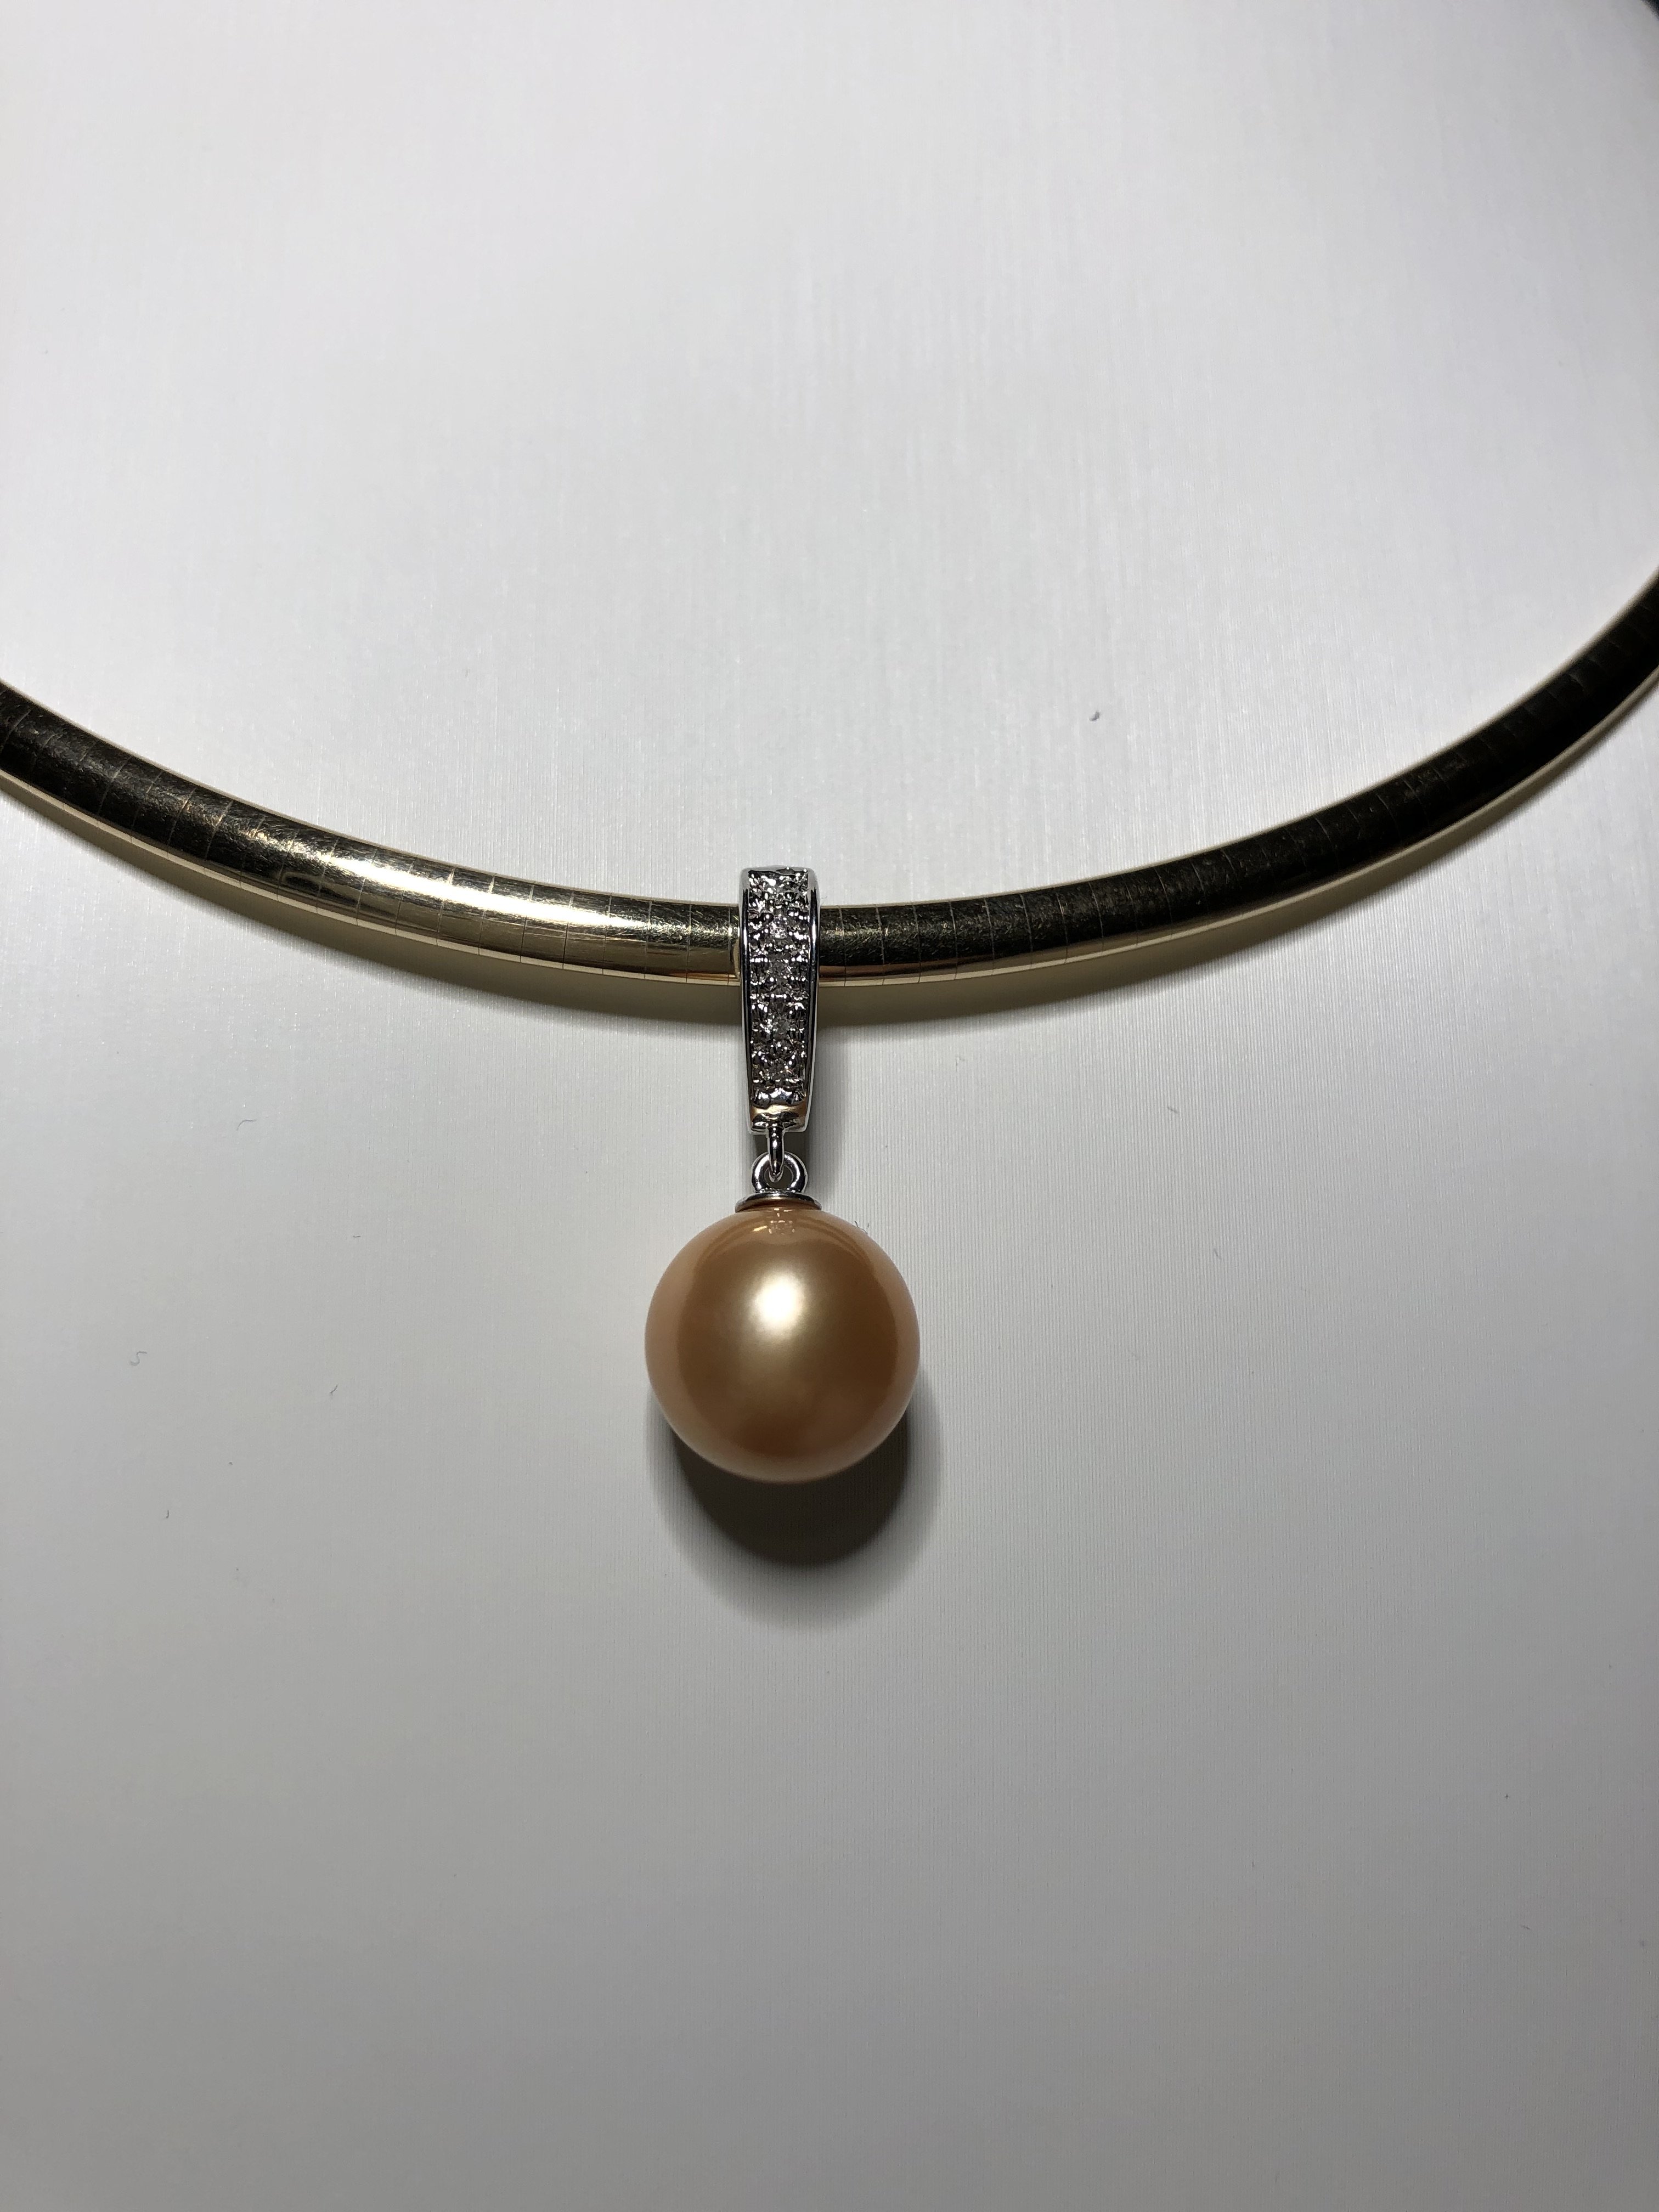 Golden south sea pearl pendant on leather